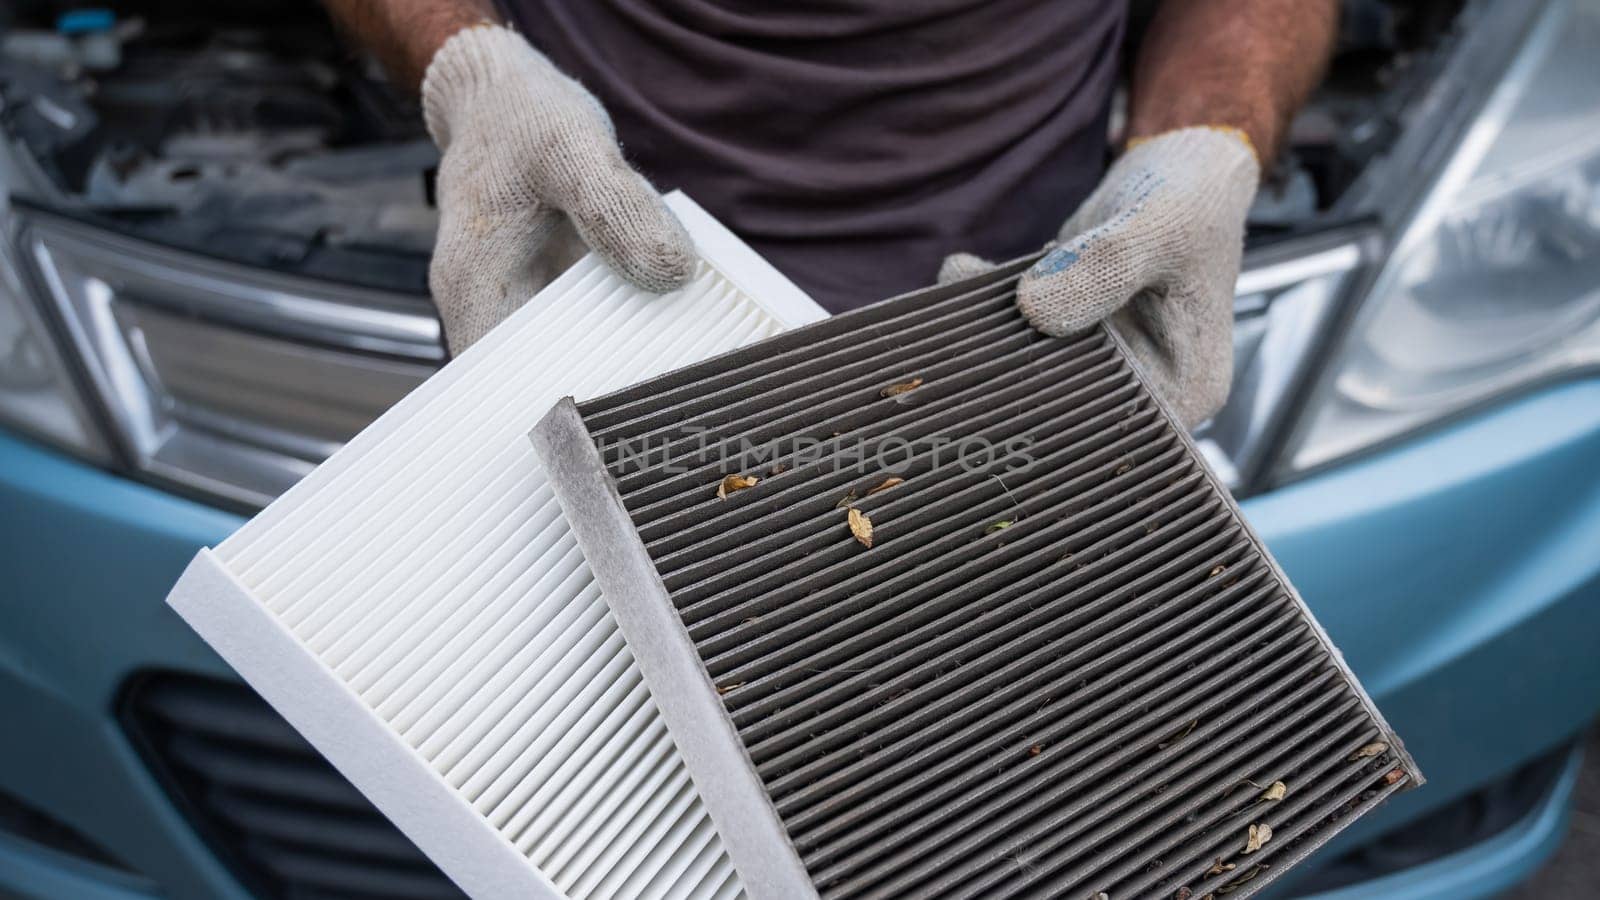 The master changes the cabin air filter of the car